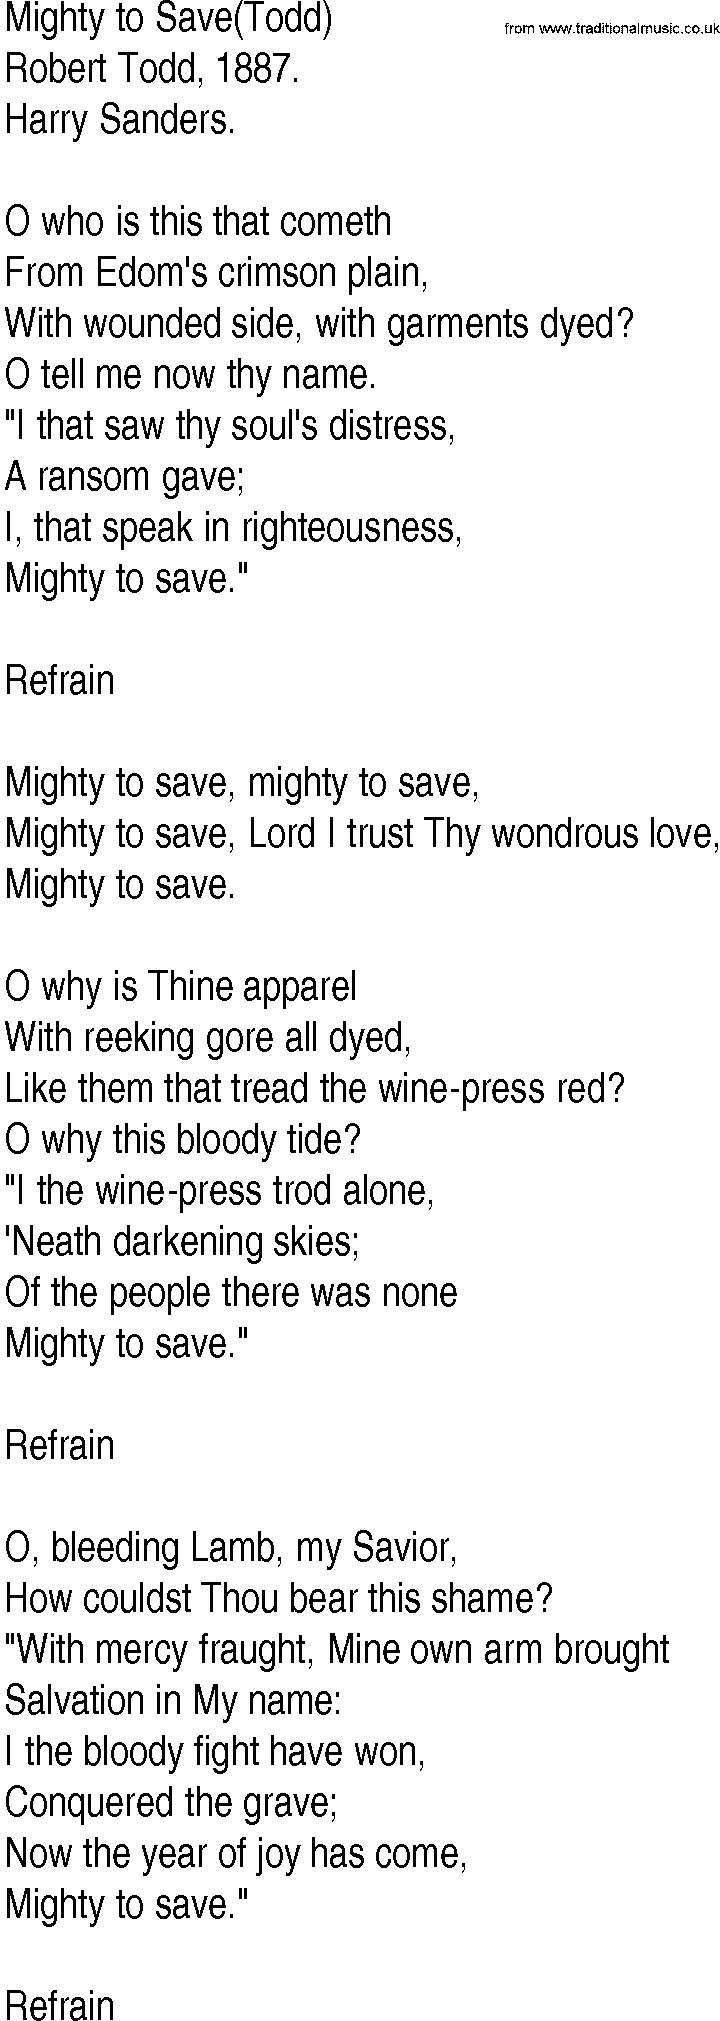 Hymn and Gospel Song: Mighty to Save(Todd) by Robert Todd lyrics